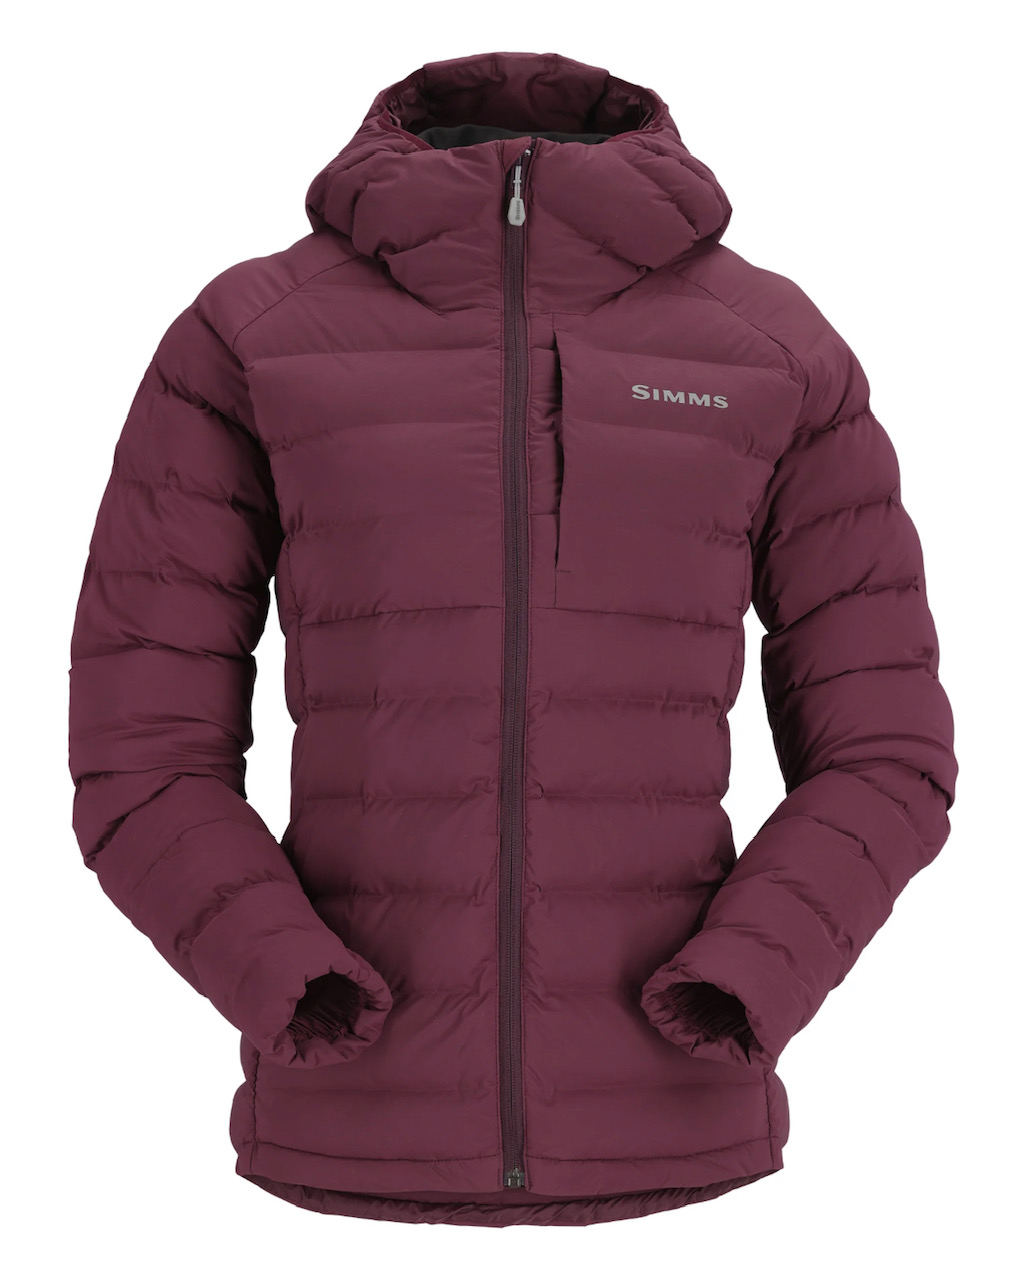 Simms W's ExStream Hooded Jacket - Mulberry - Large